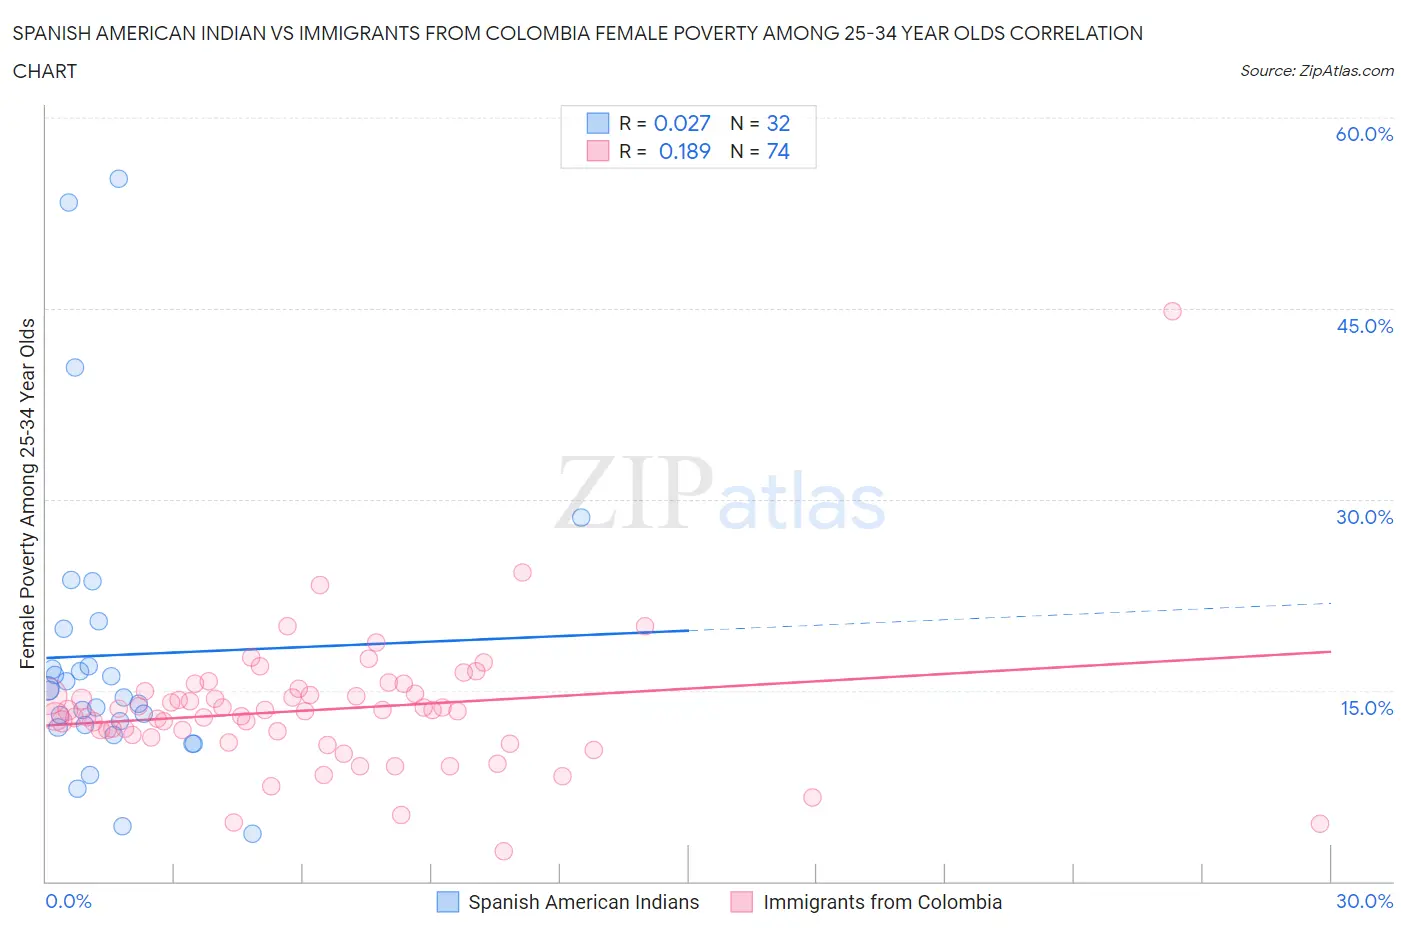 Spanish American Indian vs Immigrants from Colombia Female Poverty Among 25-34 Year Olds